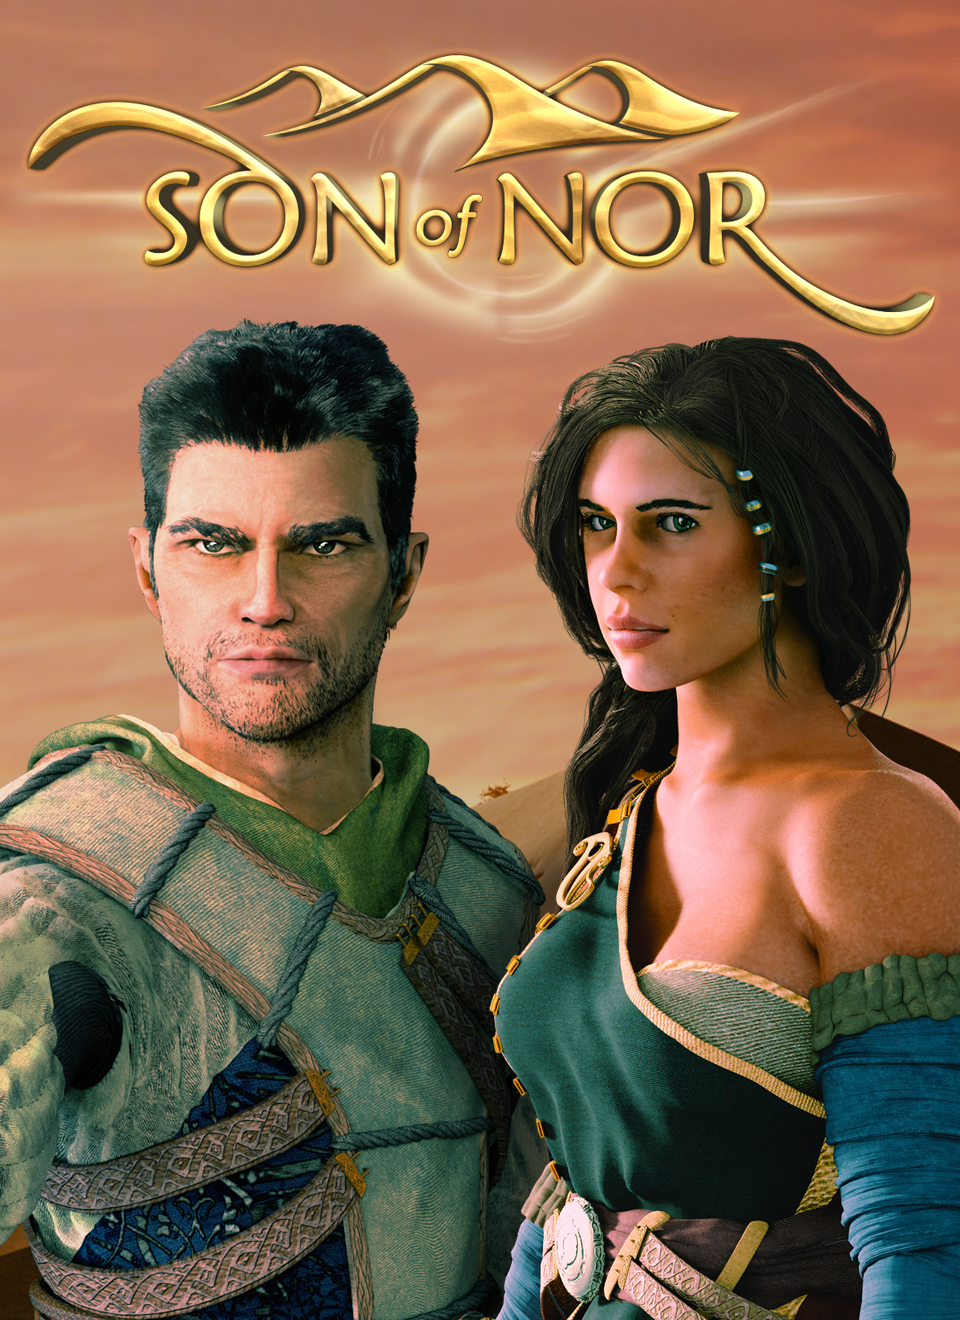 Image of Son of Nor